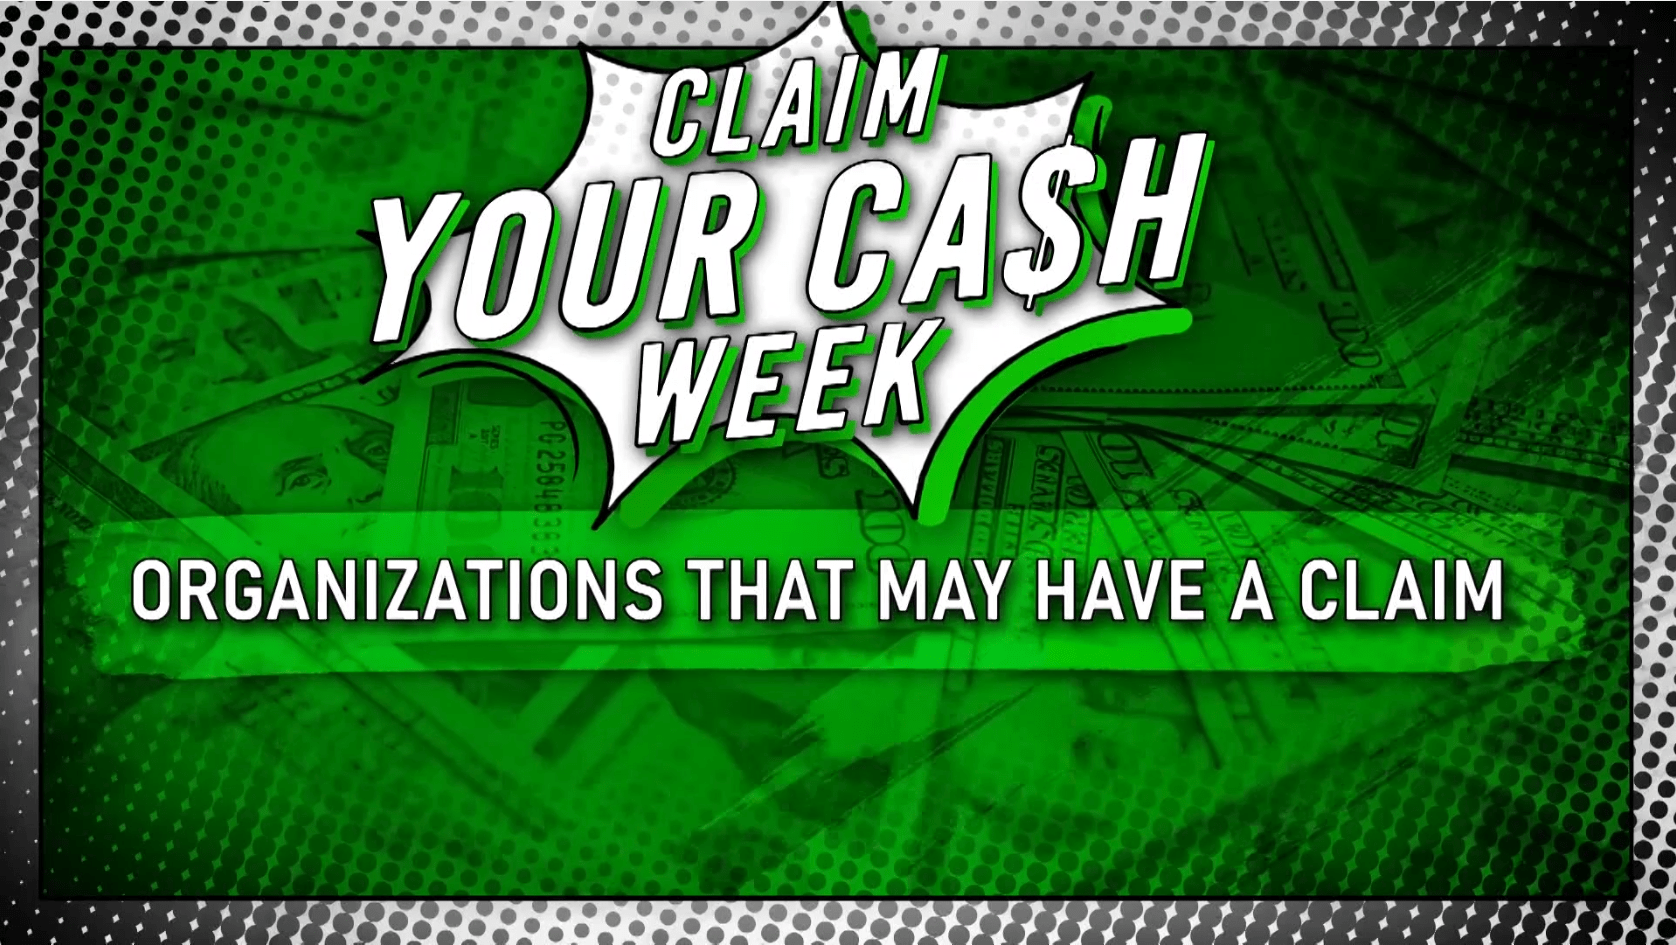 Claim your cash week | Organizations that may have a claim